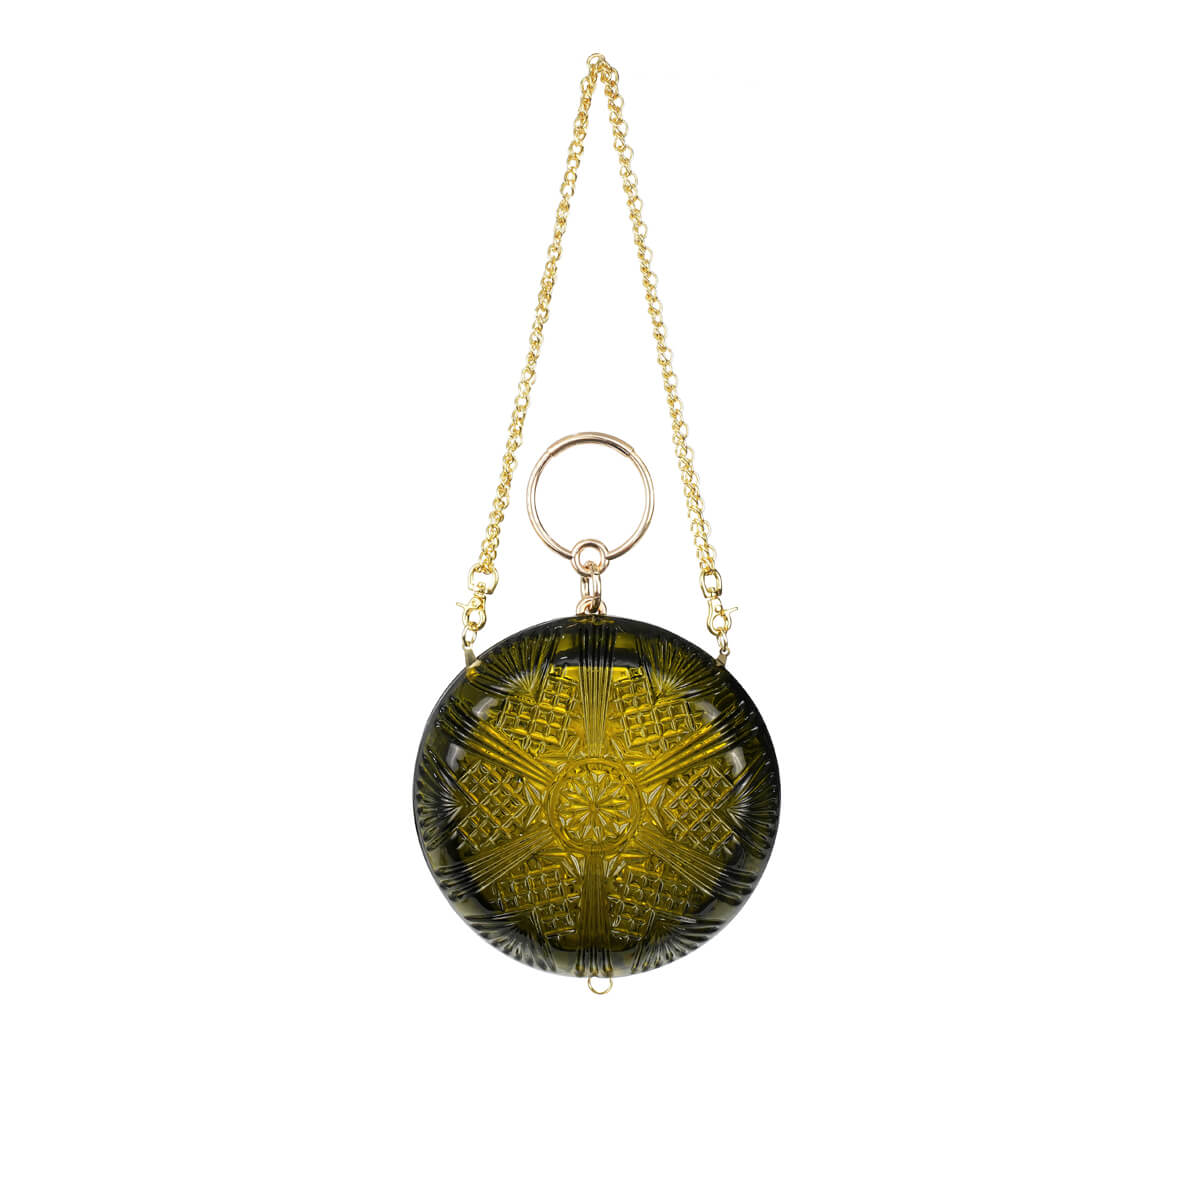 NEW IN Moonlit Circle Clutch Olive